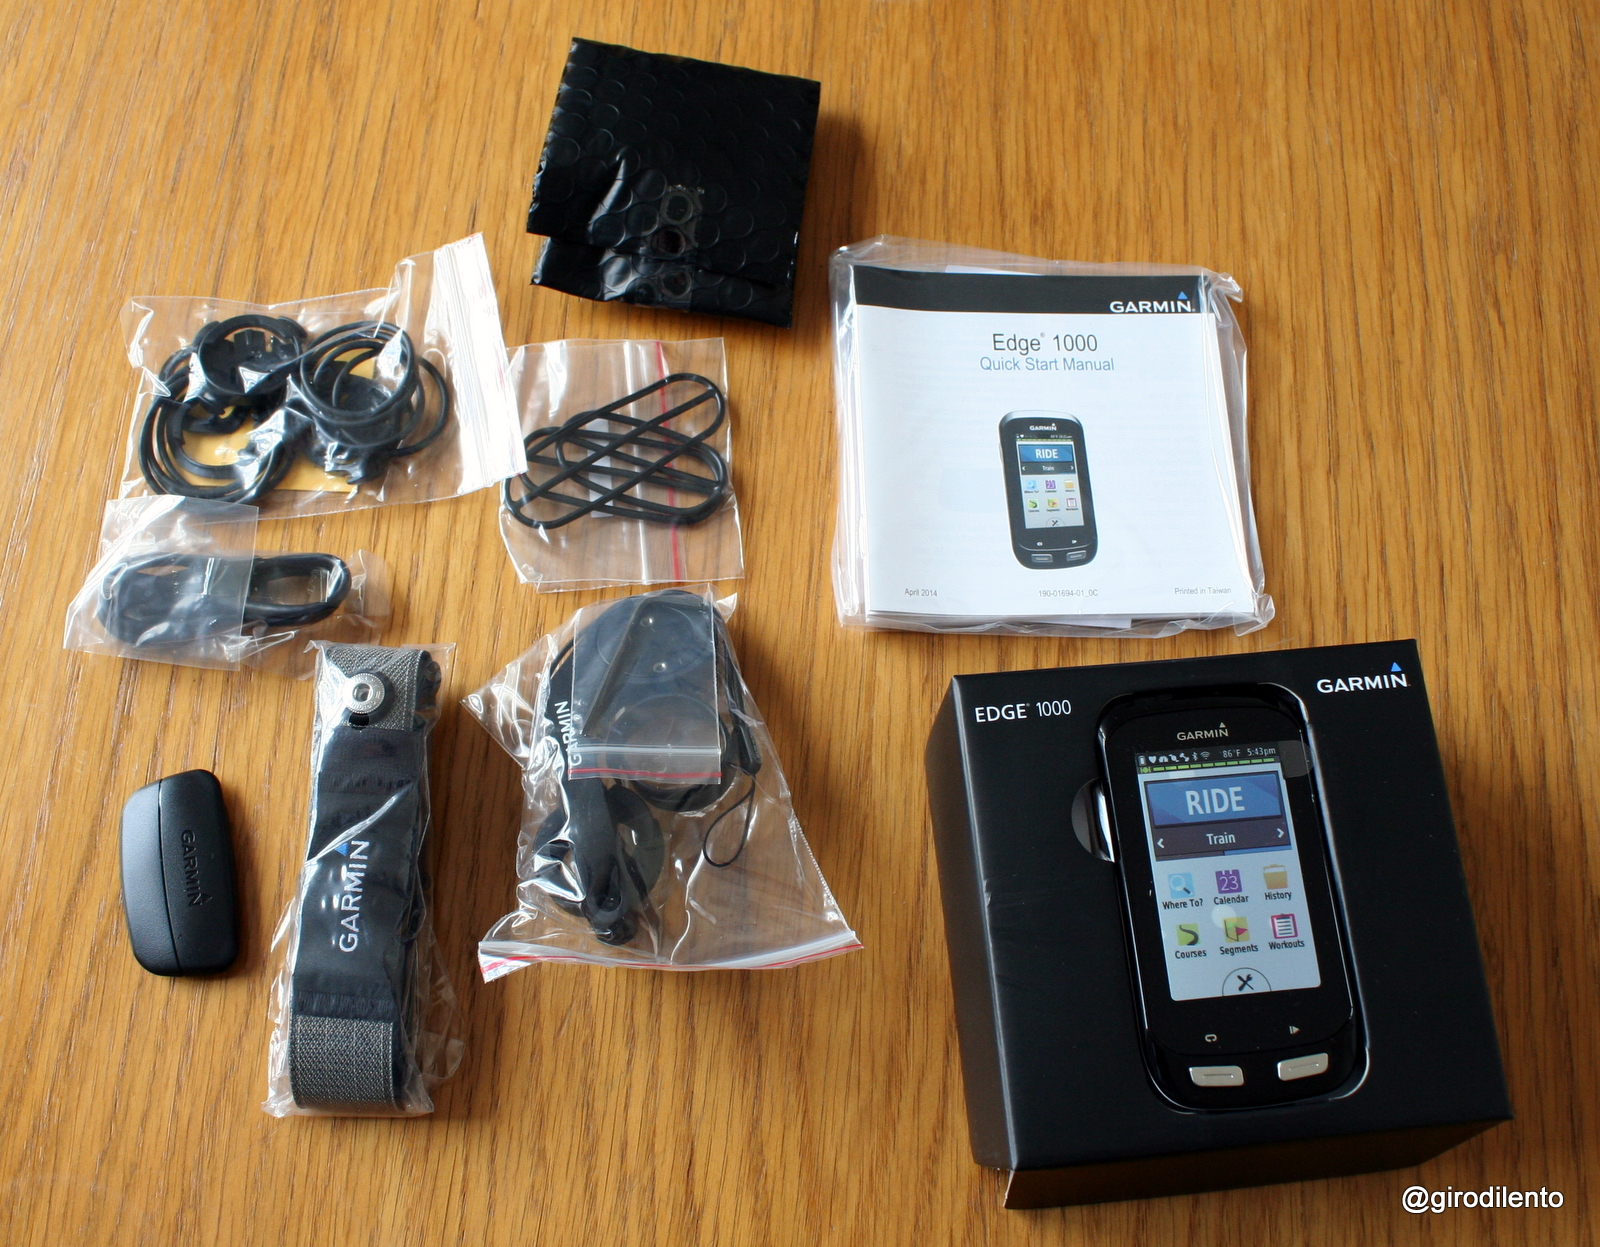 The contents of the Performance bundle version including new extended out front mount, new sensors and HRM